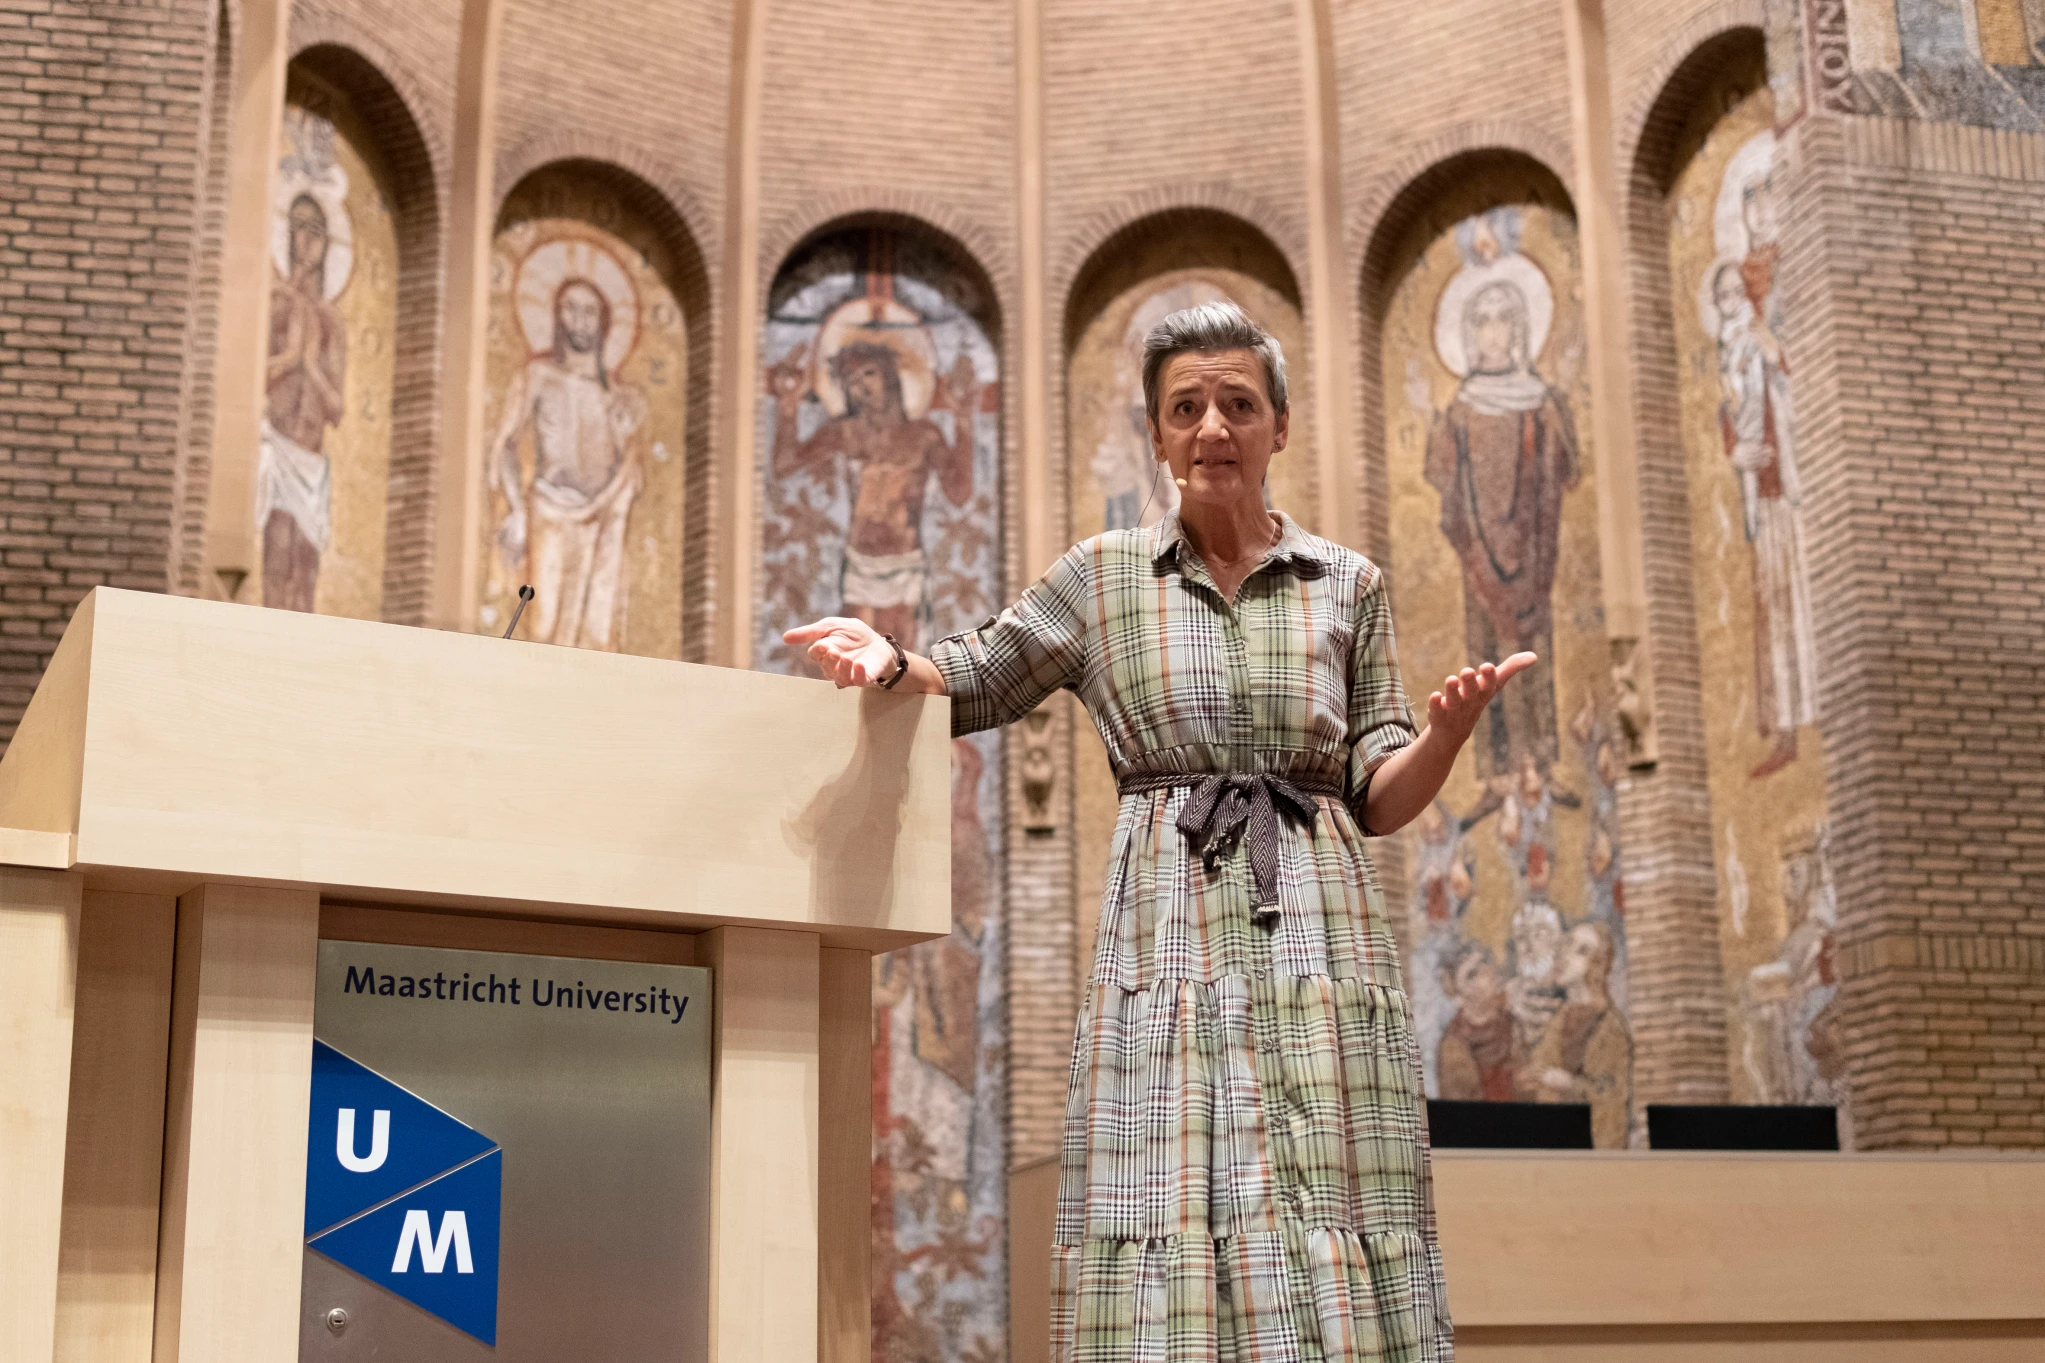 Margrethe Vestager, Executive Vice President of the European Commission for A Europe Fit for the Digital Age and European Commissioner for Competition